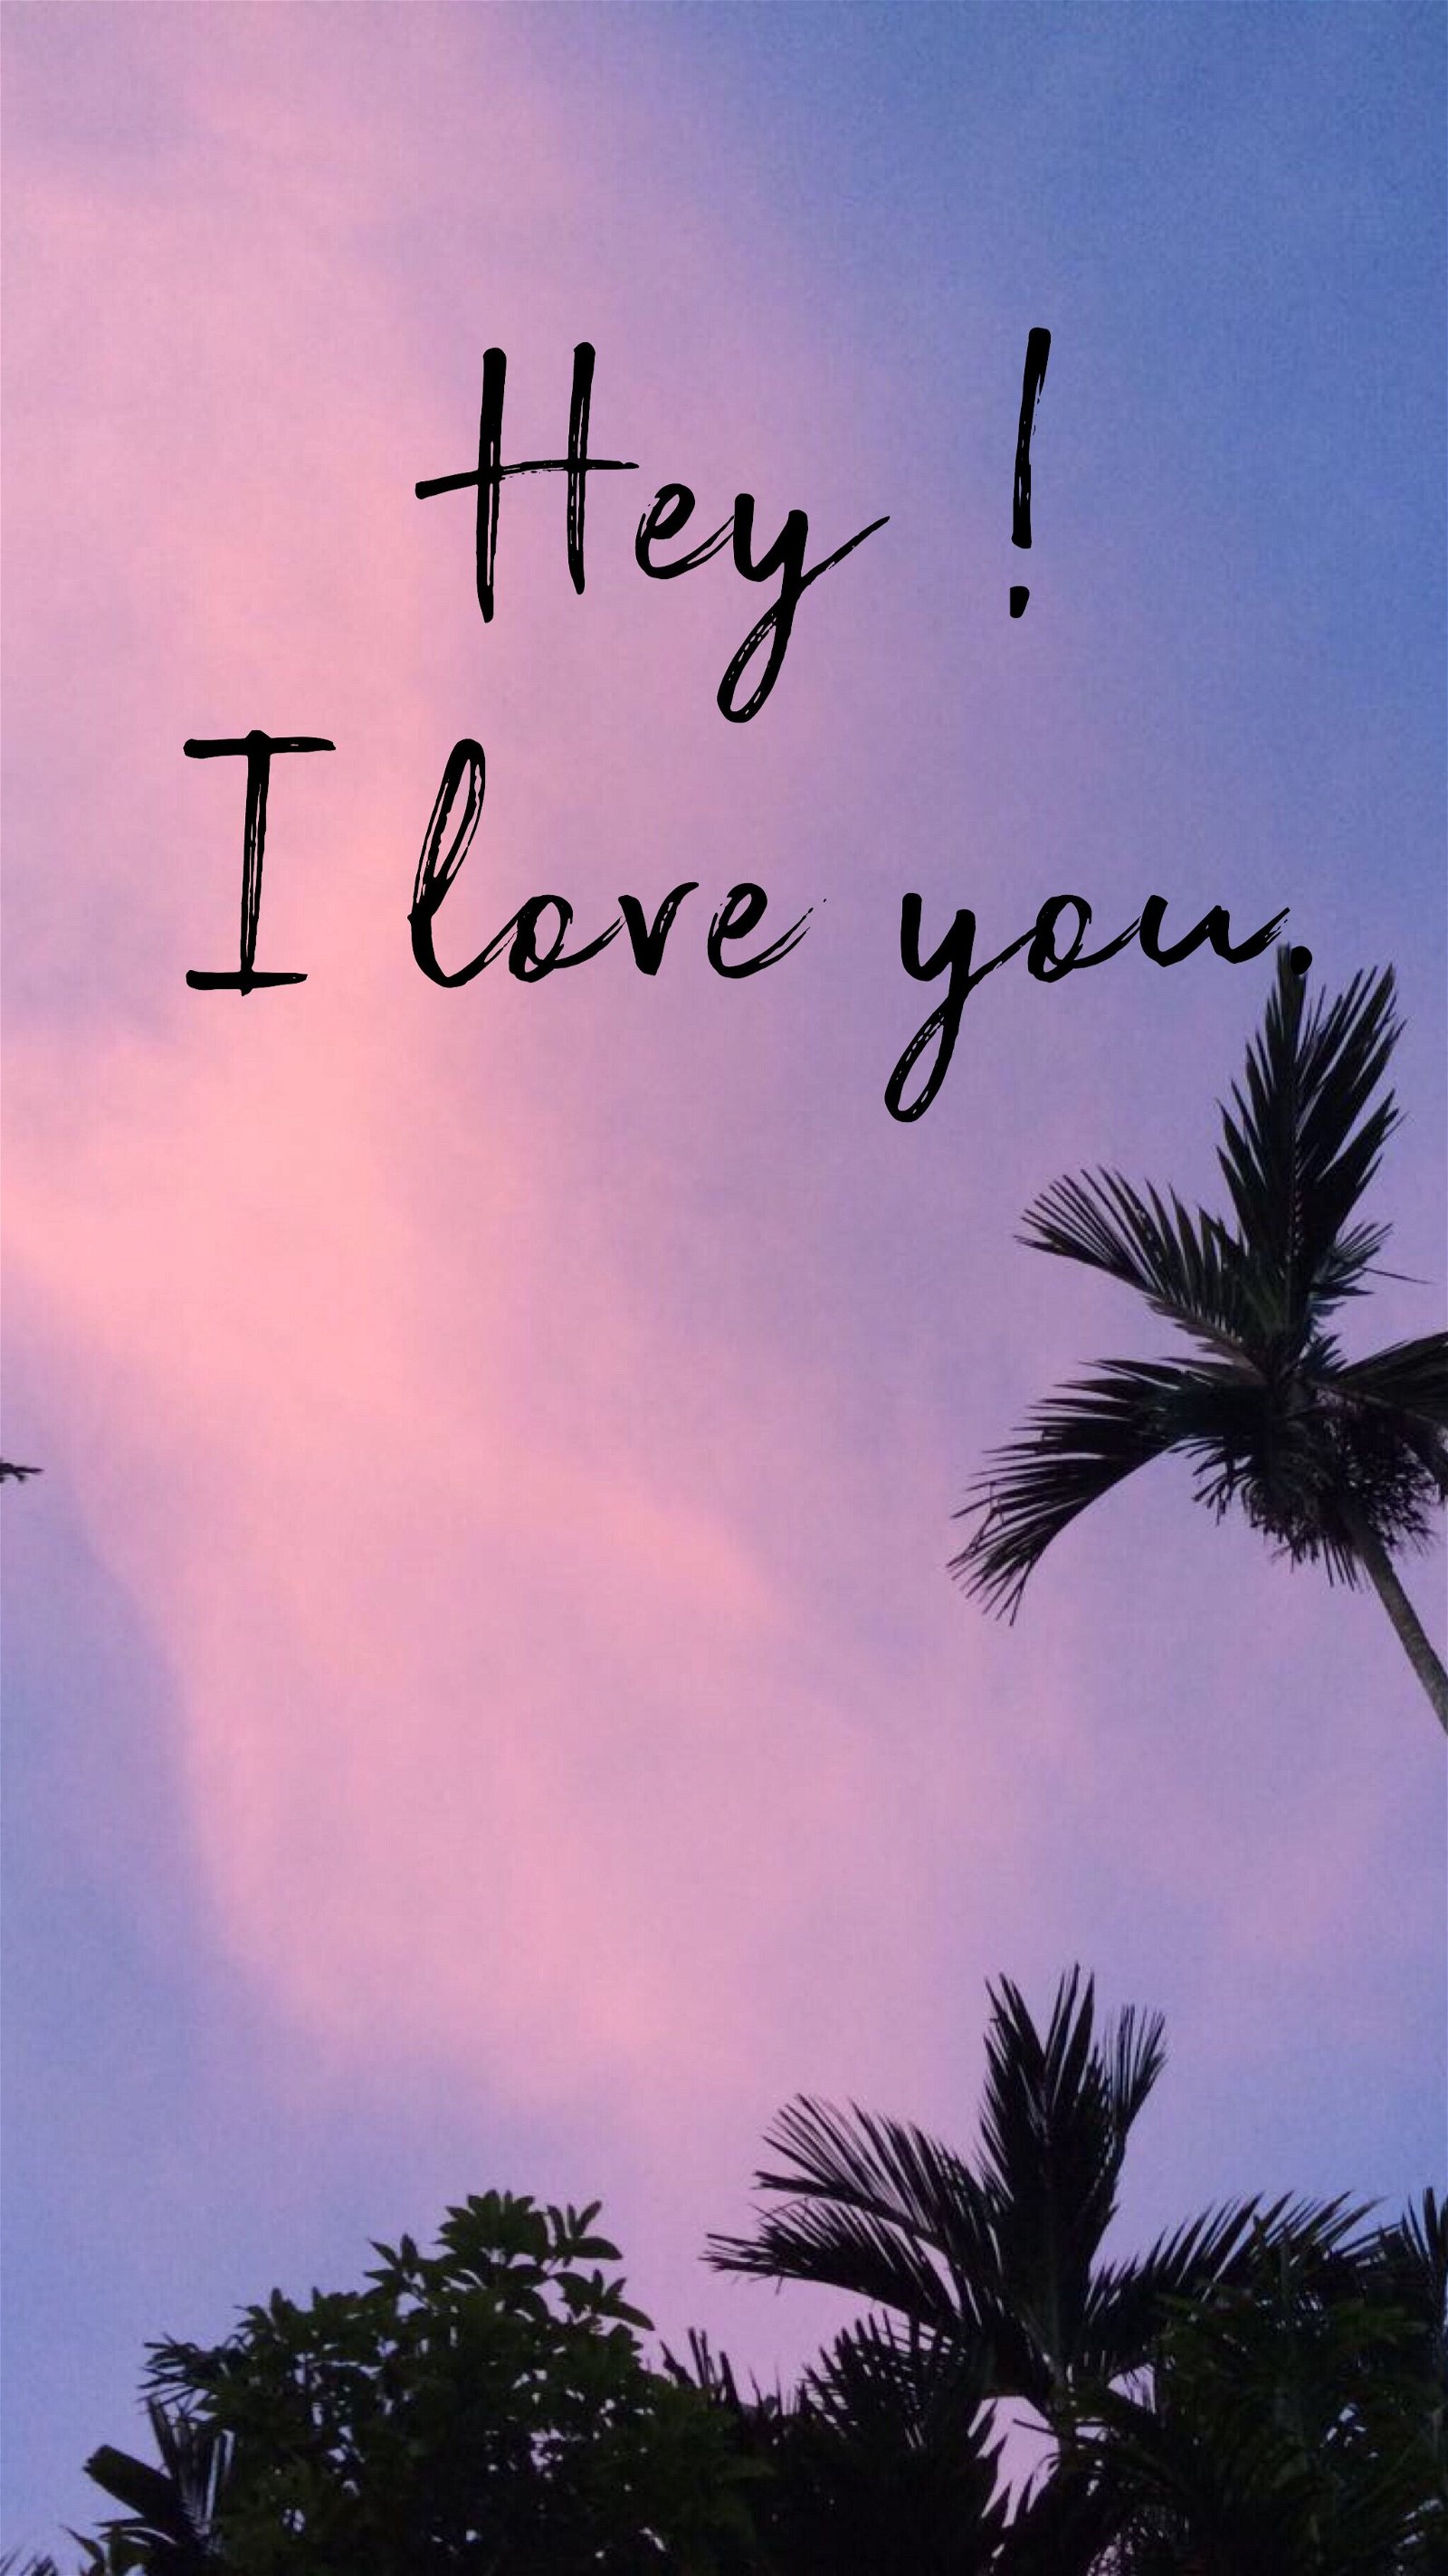 Lopyou Heart iphone wallpaper Pretty wallpapers I love you pictures  Wallpaper Download  MOONAZ